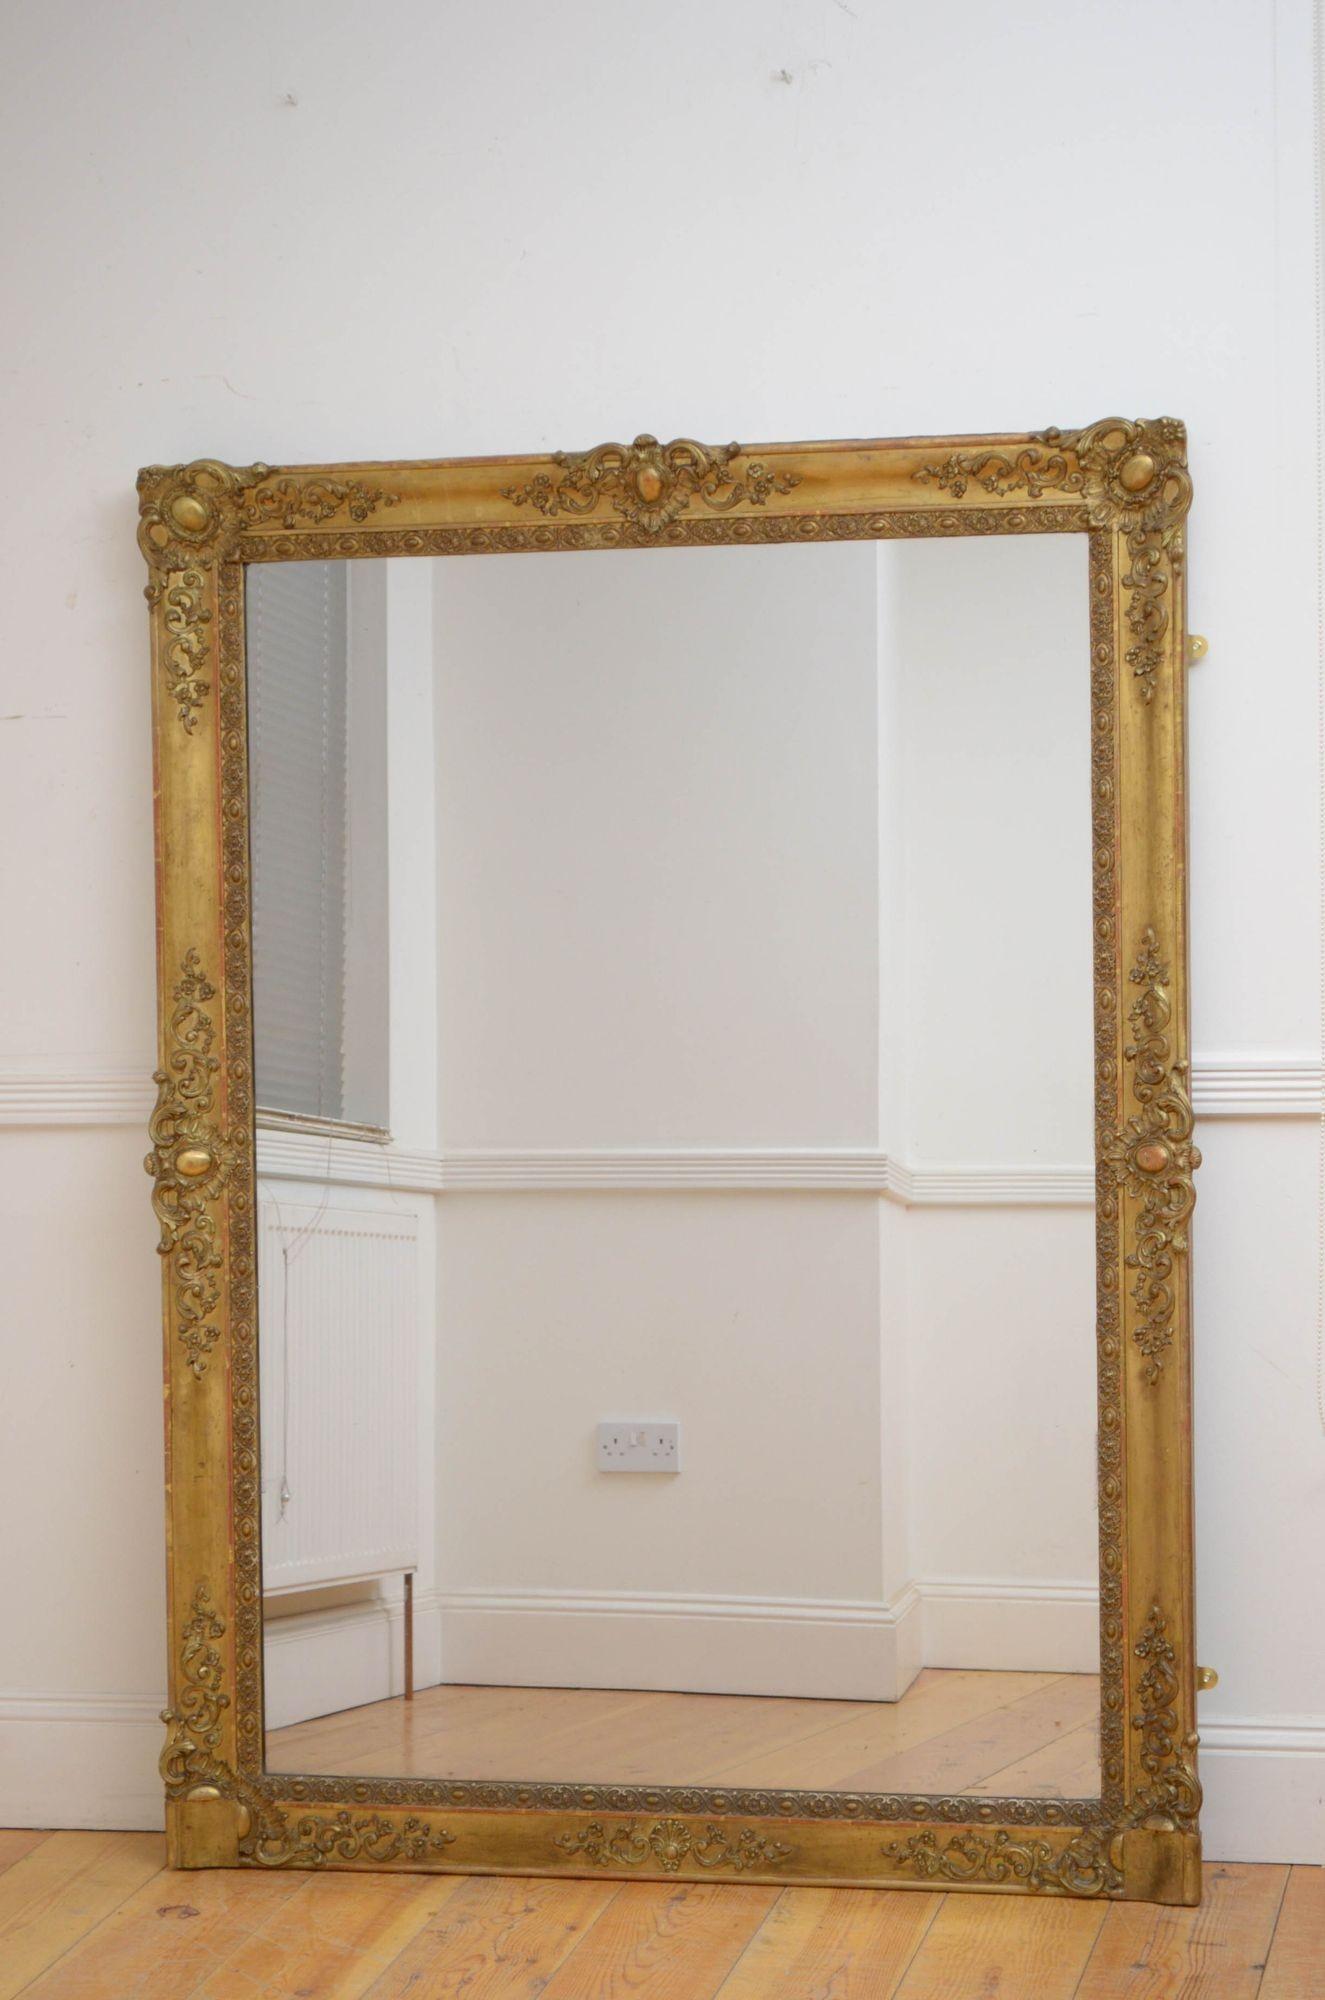 Sn5290 Attractive 19th century gilded wall mirror with original glass with air bubbles and some foxing in gilded frame with decorative floral carvings to corners. This antique mirror retains its original glass, gilt and backboards, all in excellent